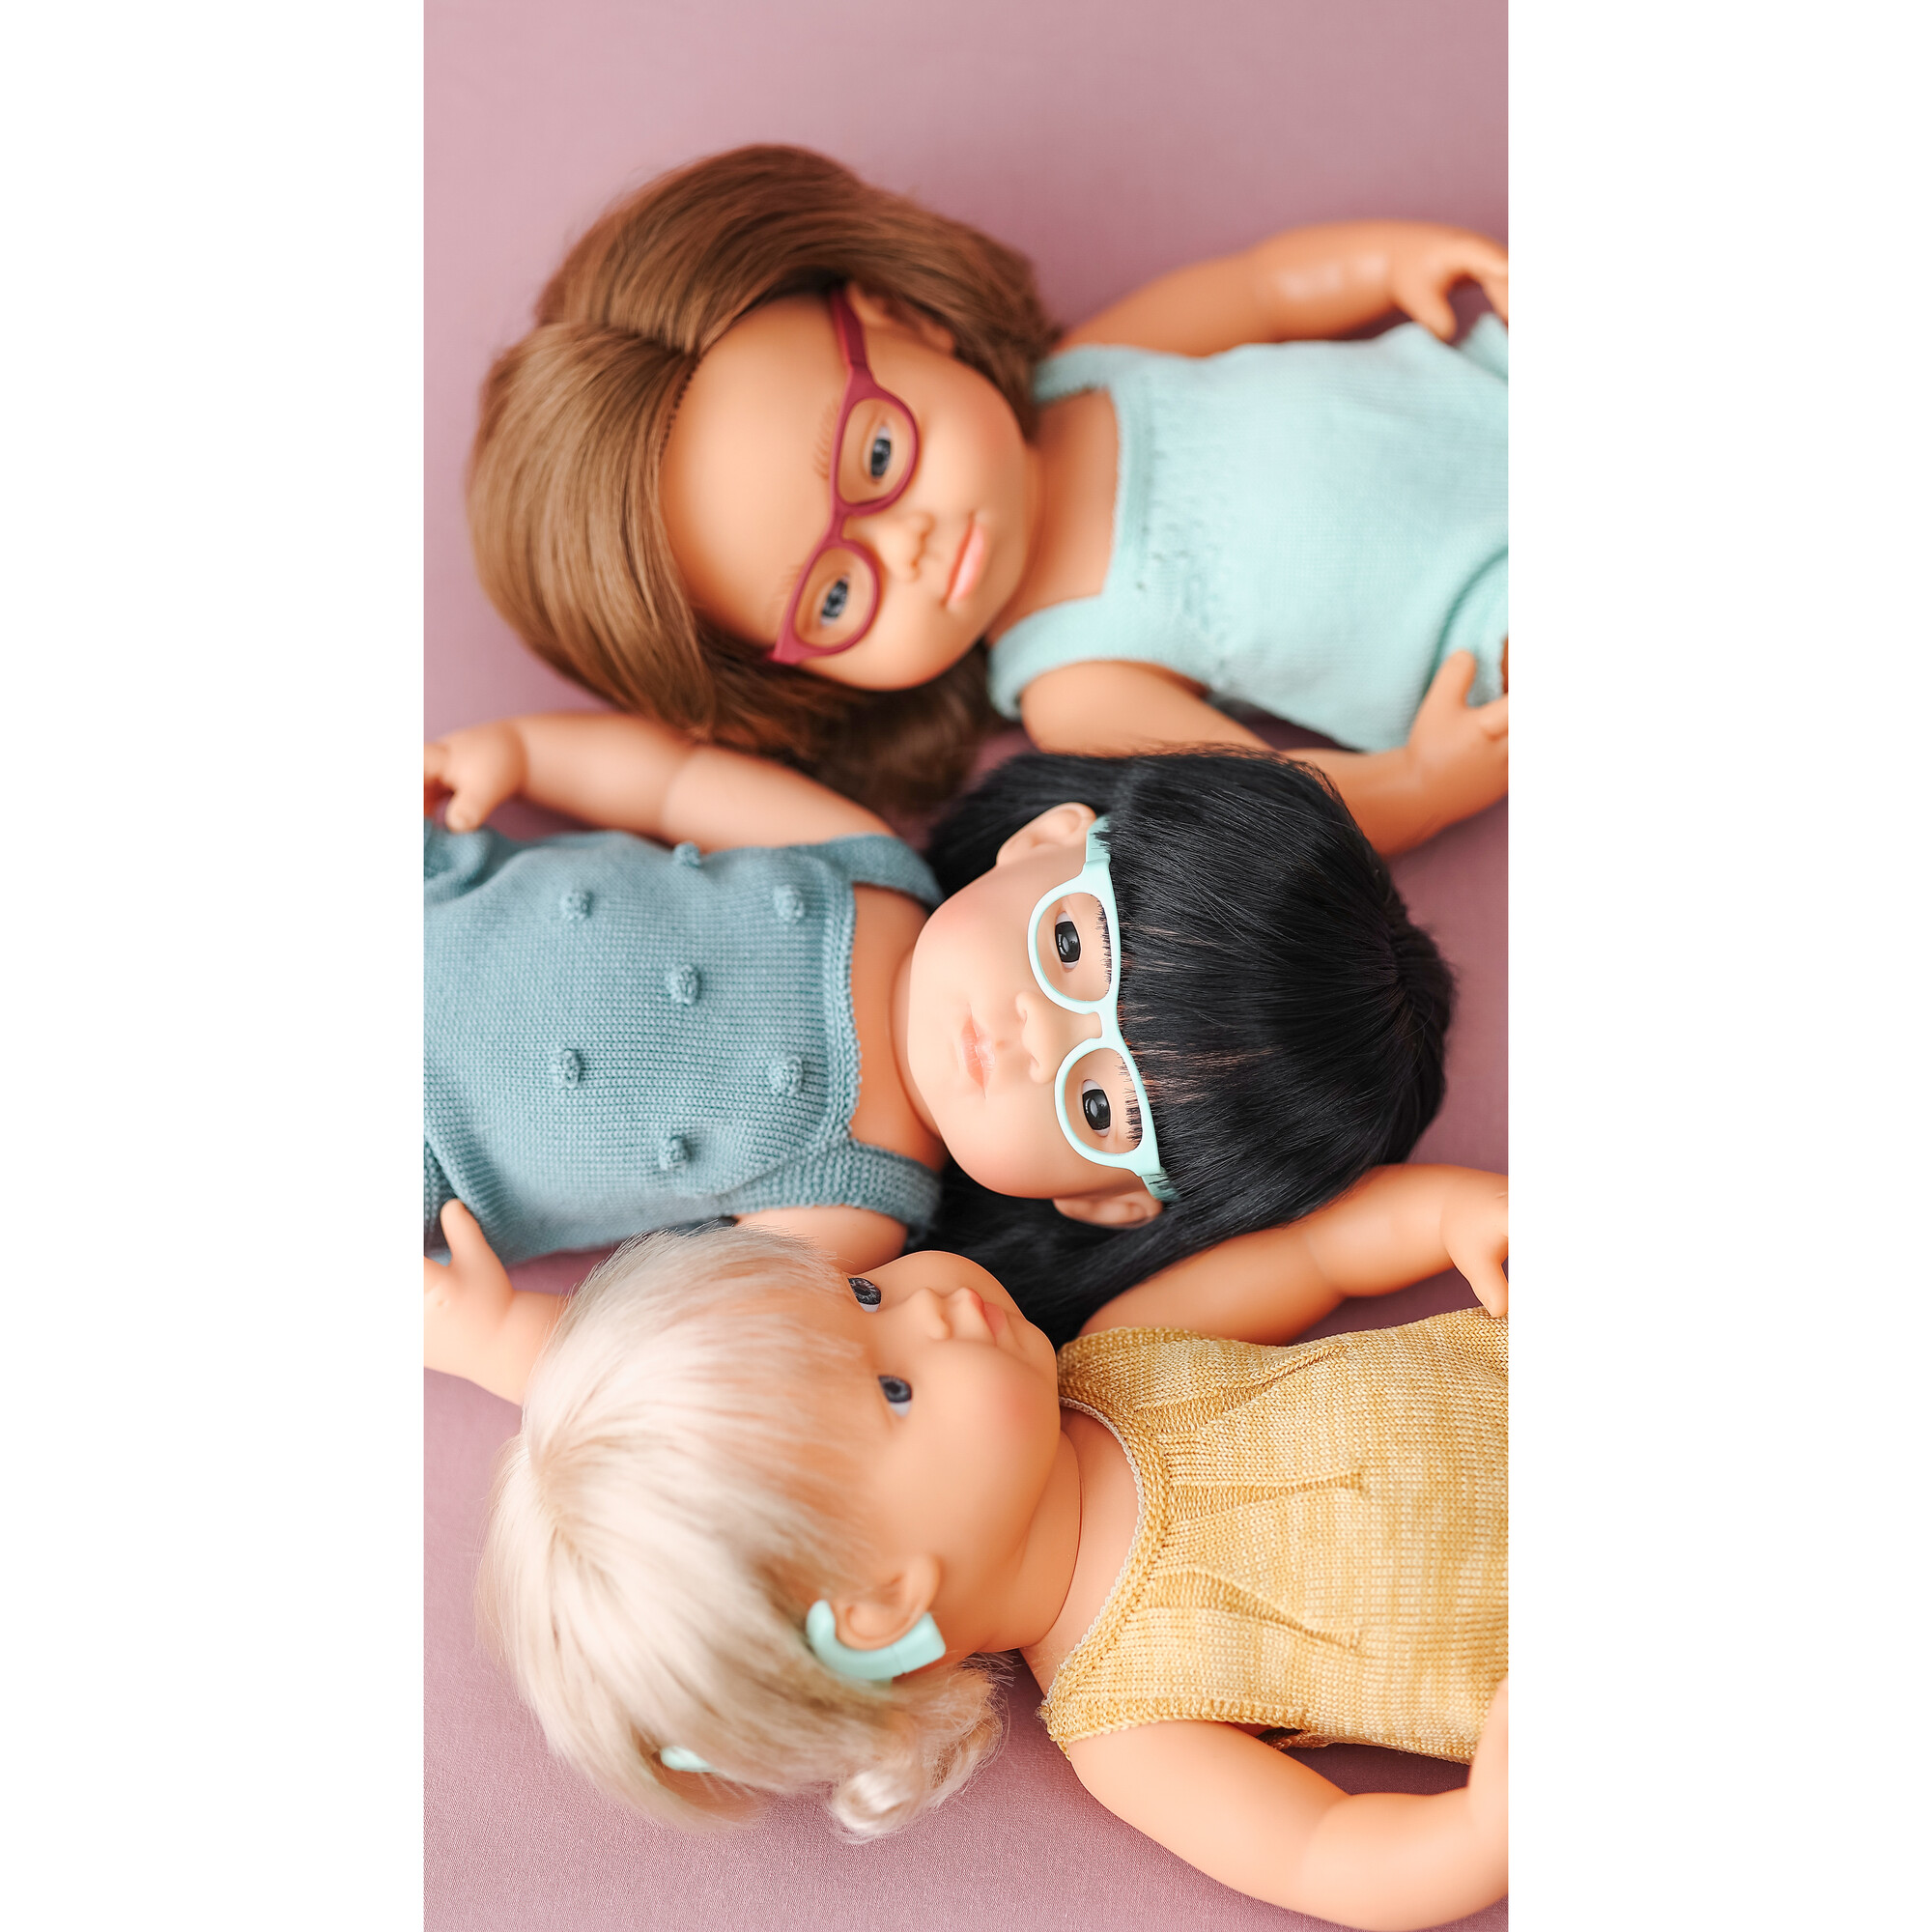 Miniland Educational Baby Doll Asian Girl With Glasses 15'', Polybagged |  Oriental Trading